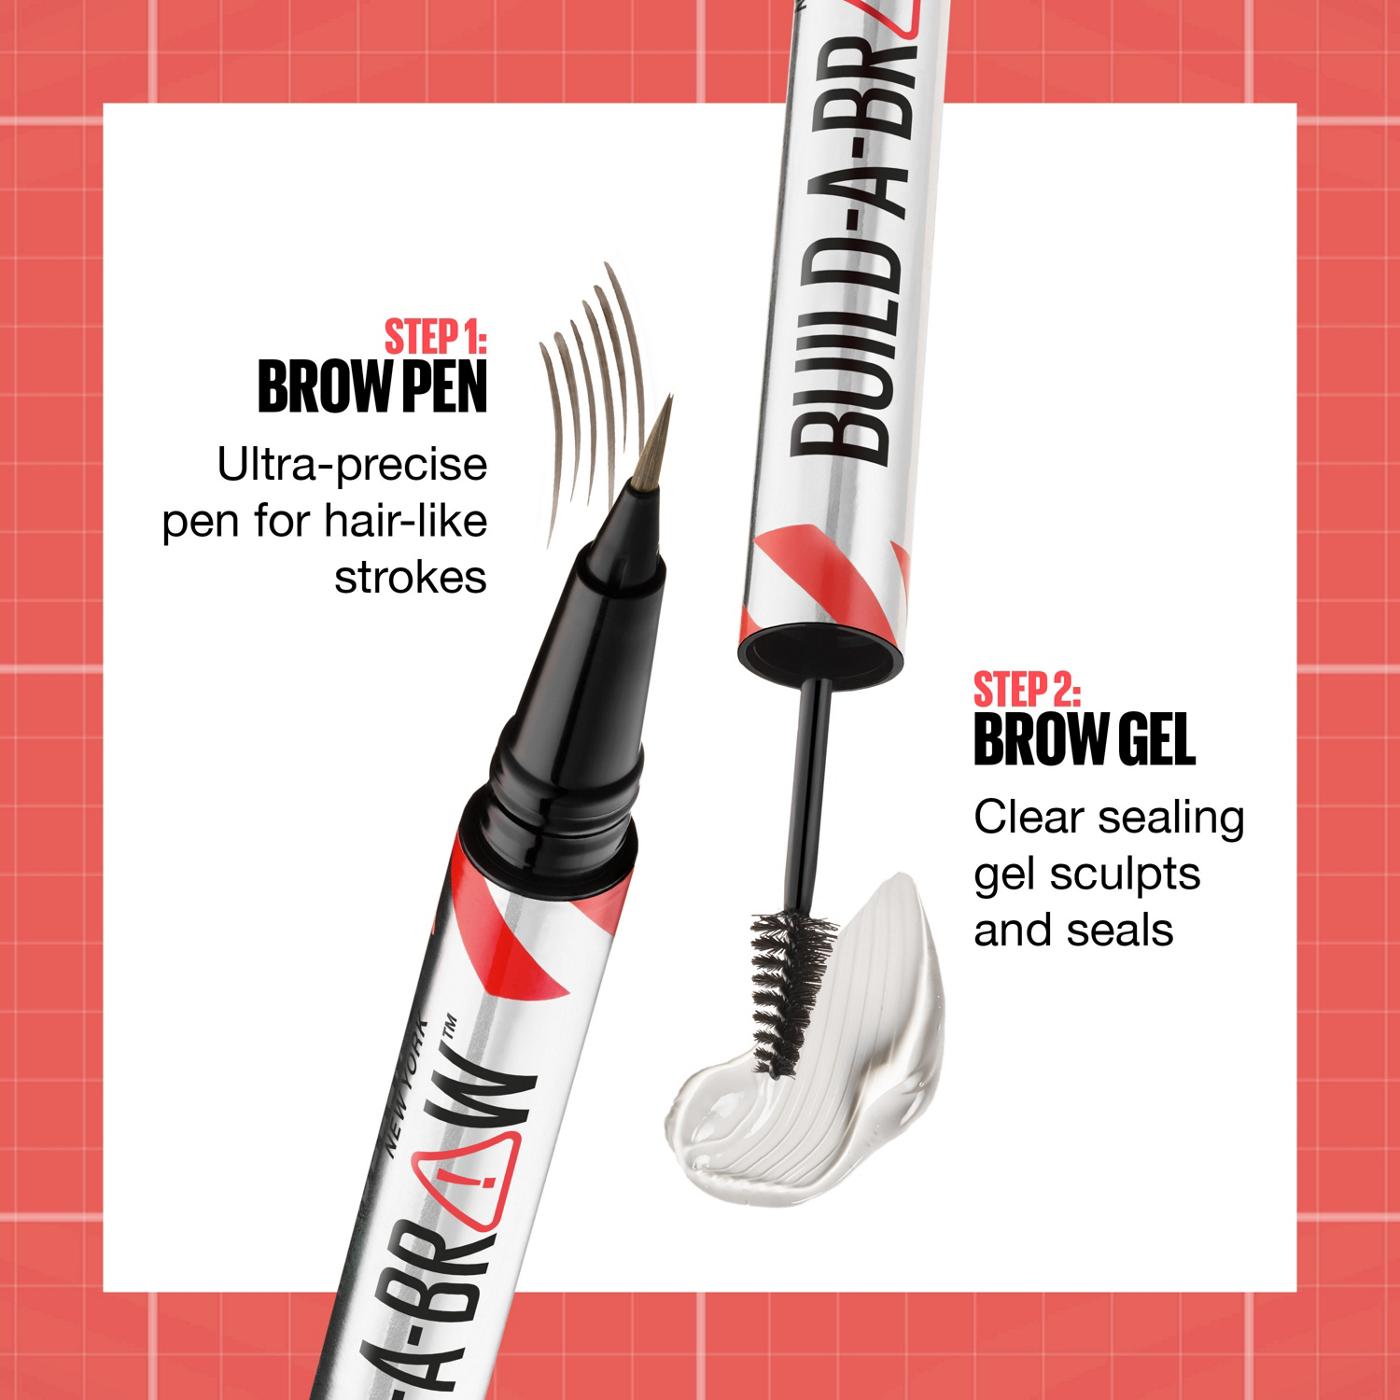 Maybelline Build A Brow 2 In 1 Brow Pen - Deep Brown; image 15 of 17